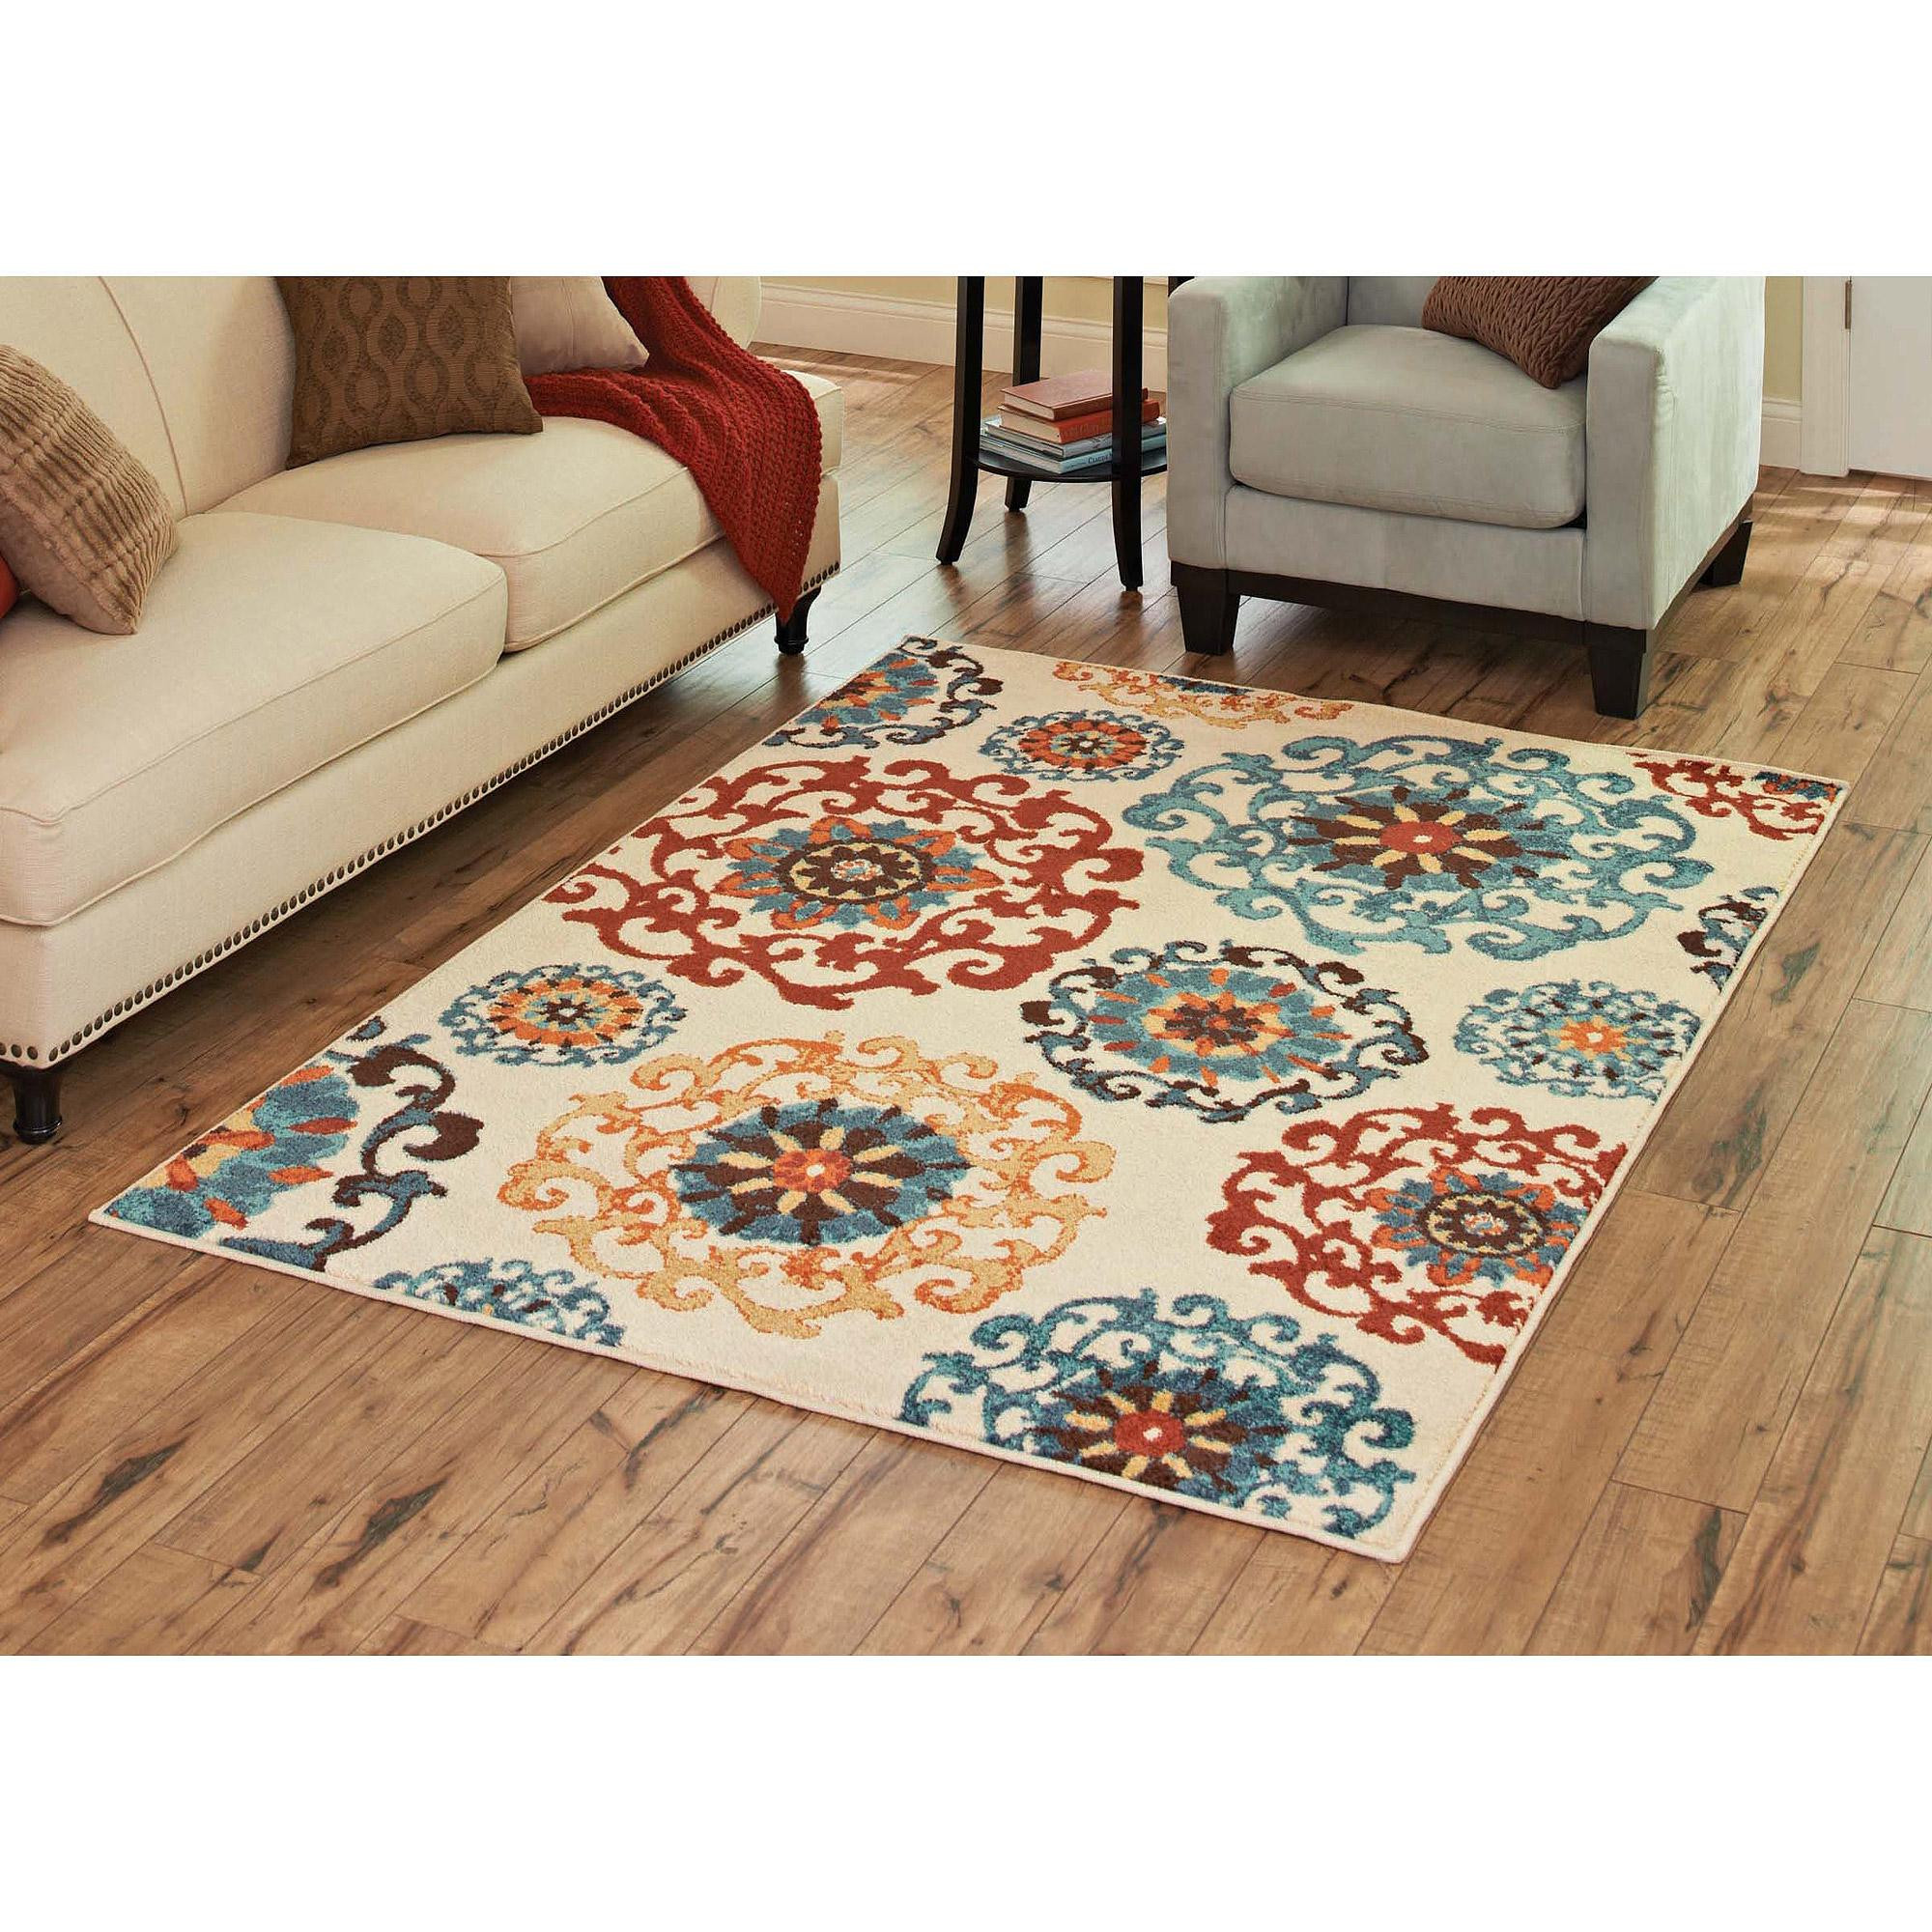 Living Room Rugs Target
 Floor How To Decorate Cool Flooring With Lowes Area Rugs